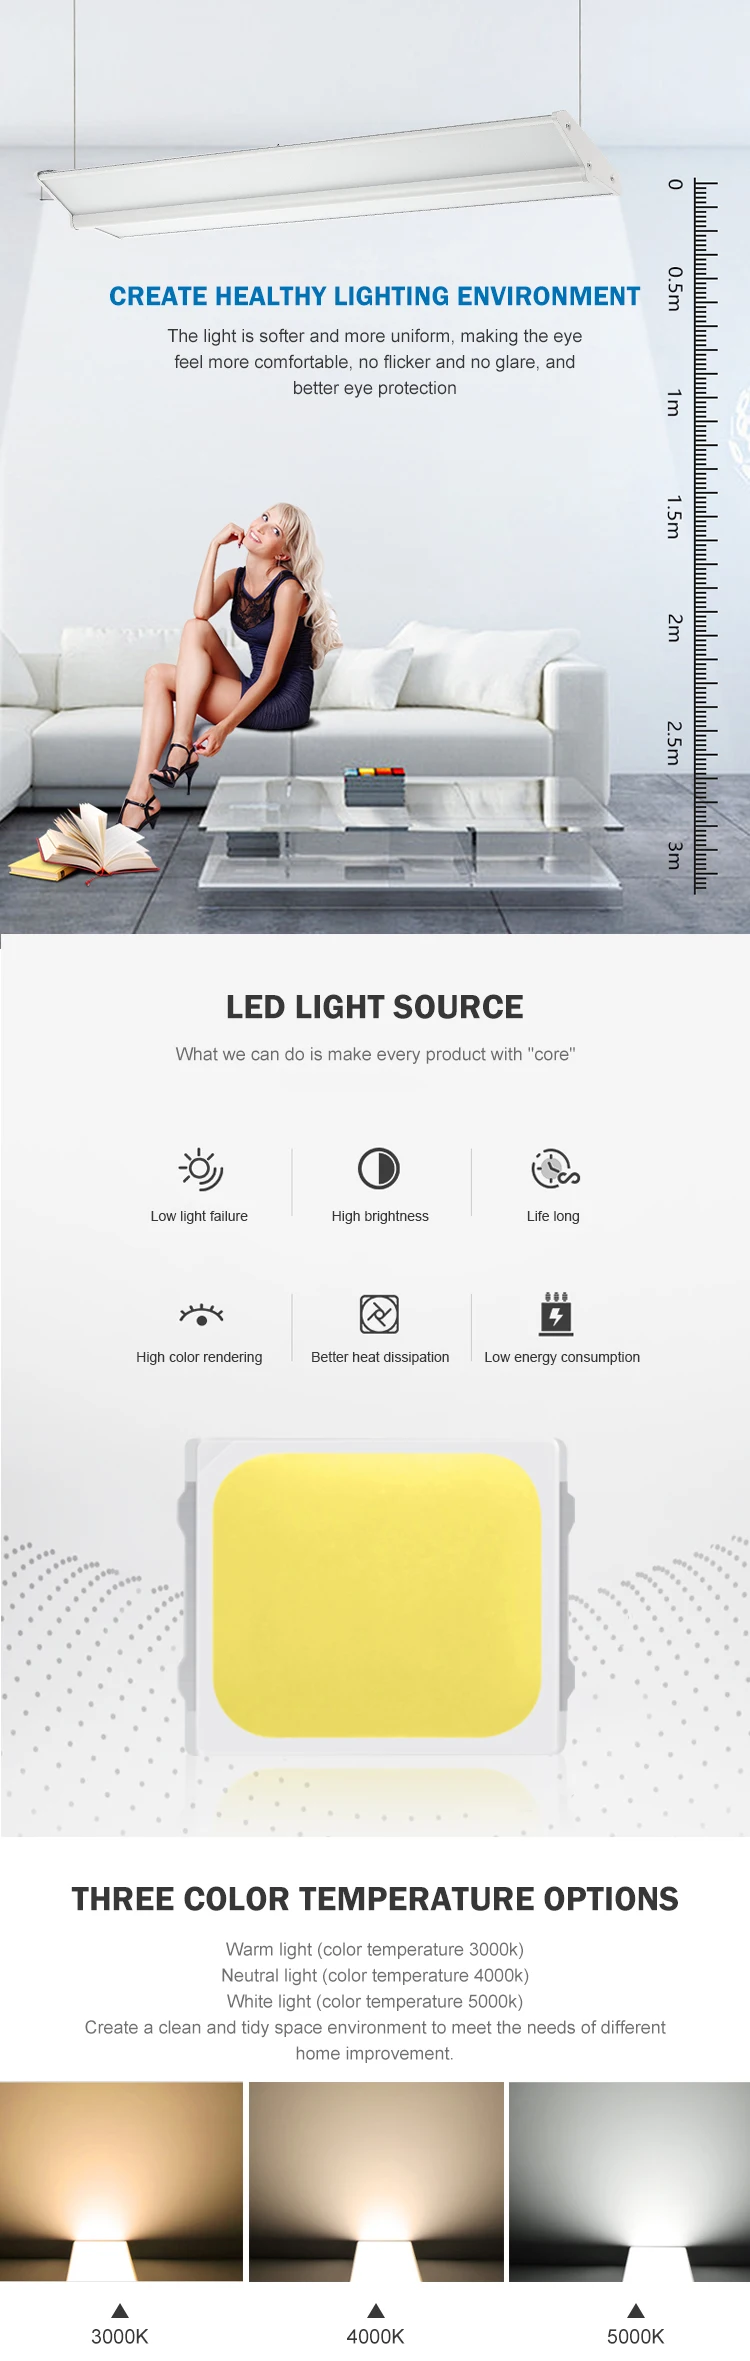 Surface mounted smd 4ft 30w 40w LED Troffer Lighting Fixture